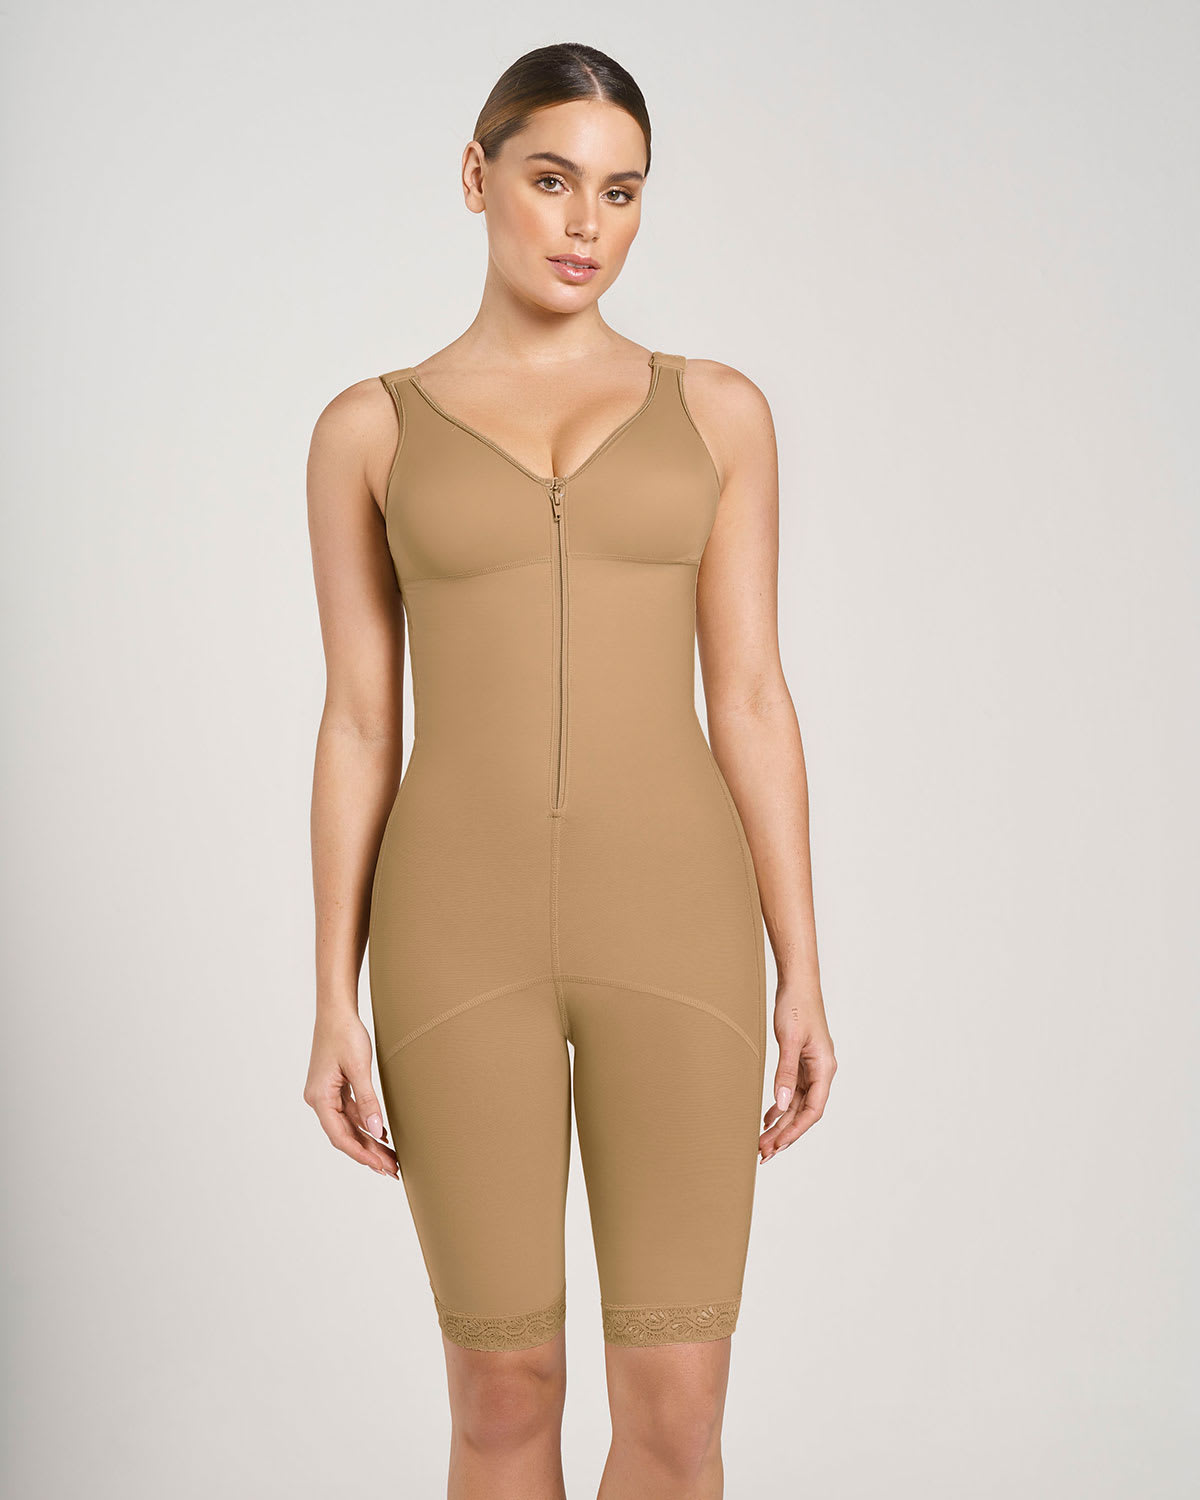 Full Coverage Hook And Zip Post Surgical Bodysuit Firm Compression Leonisa